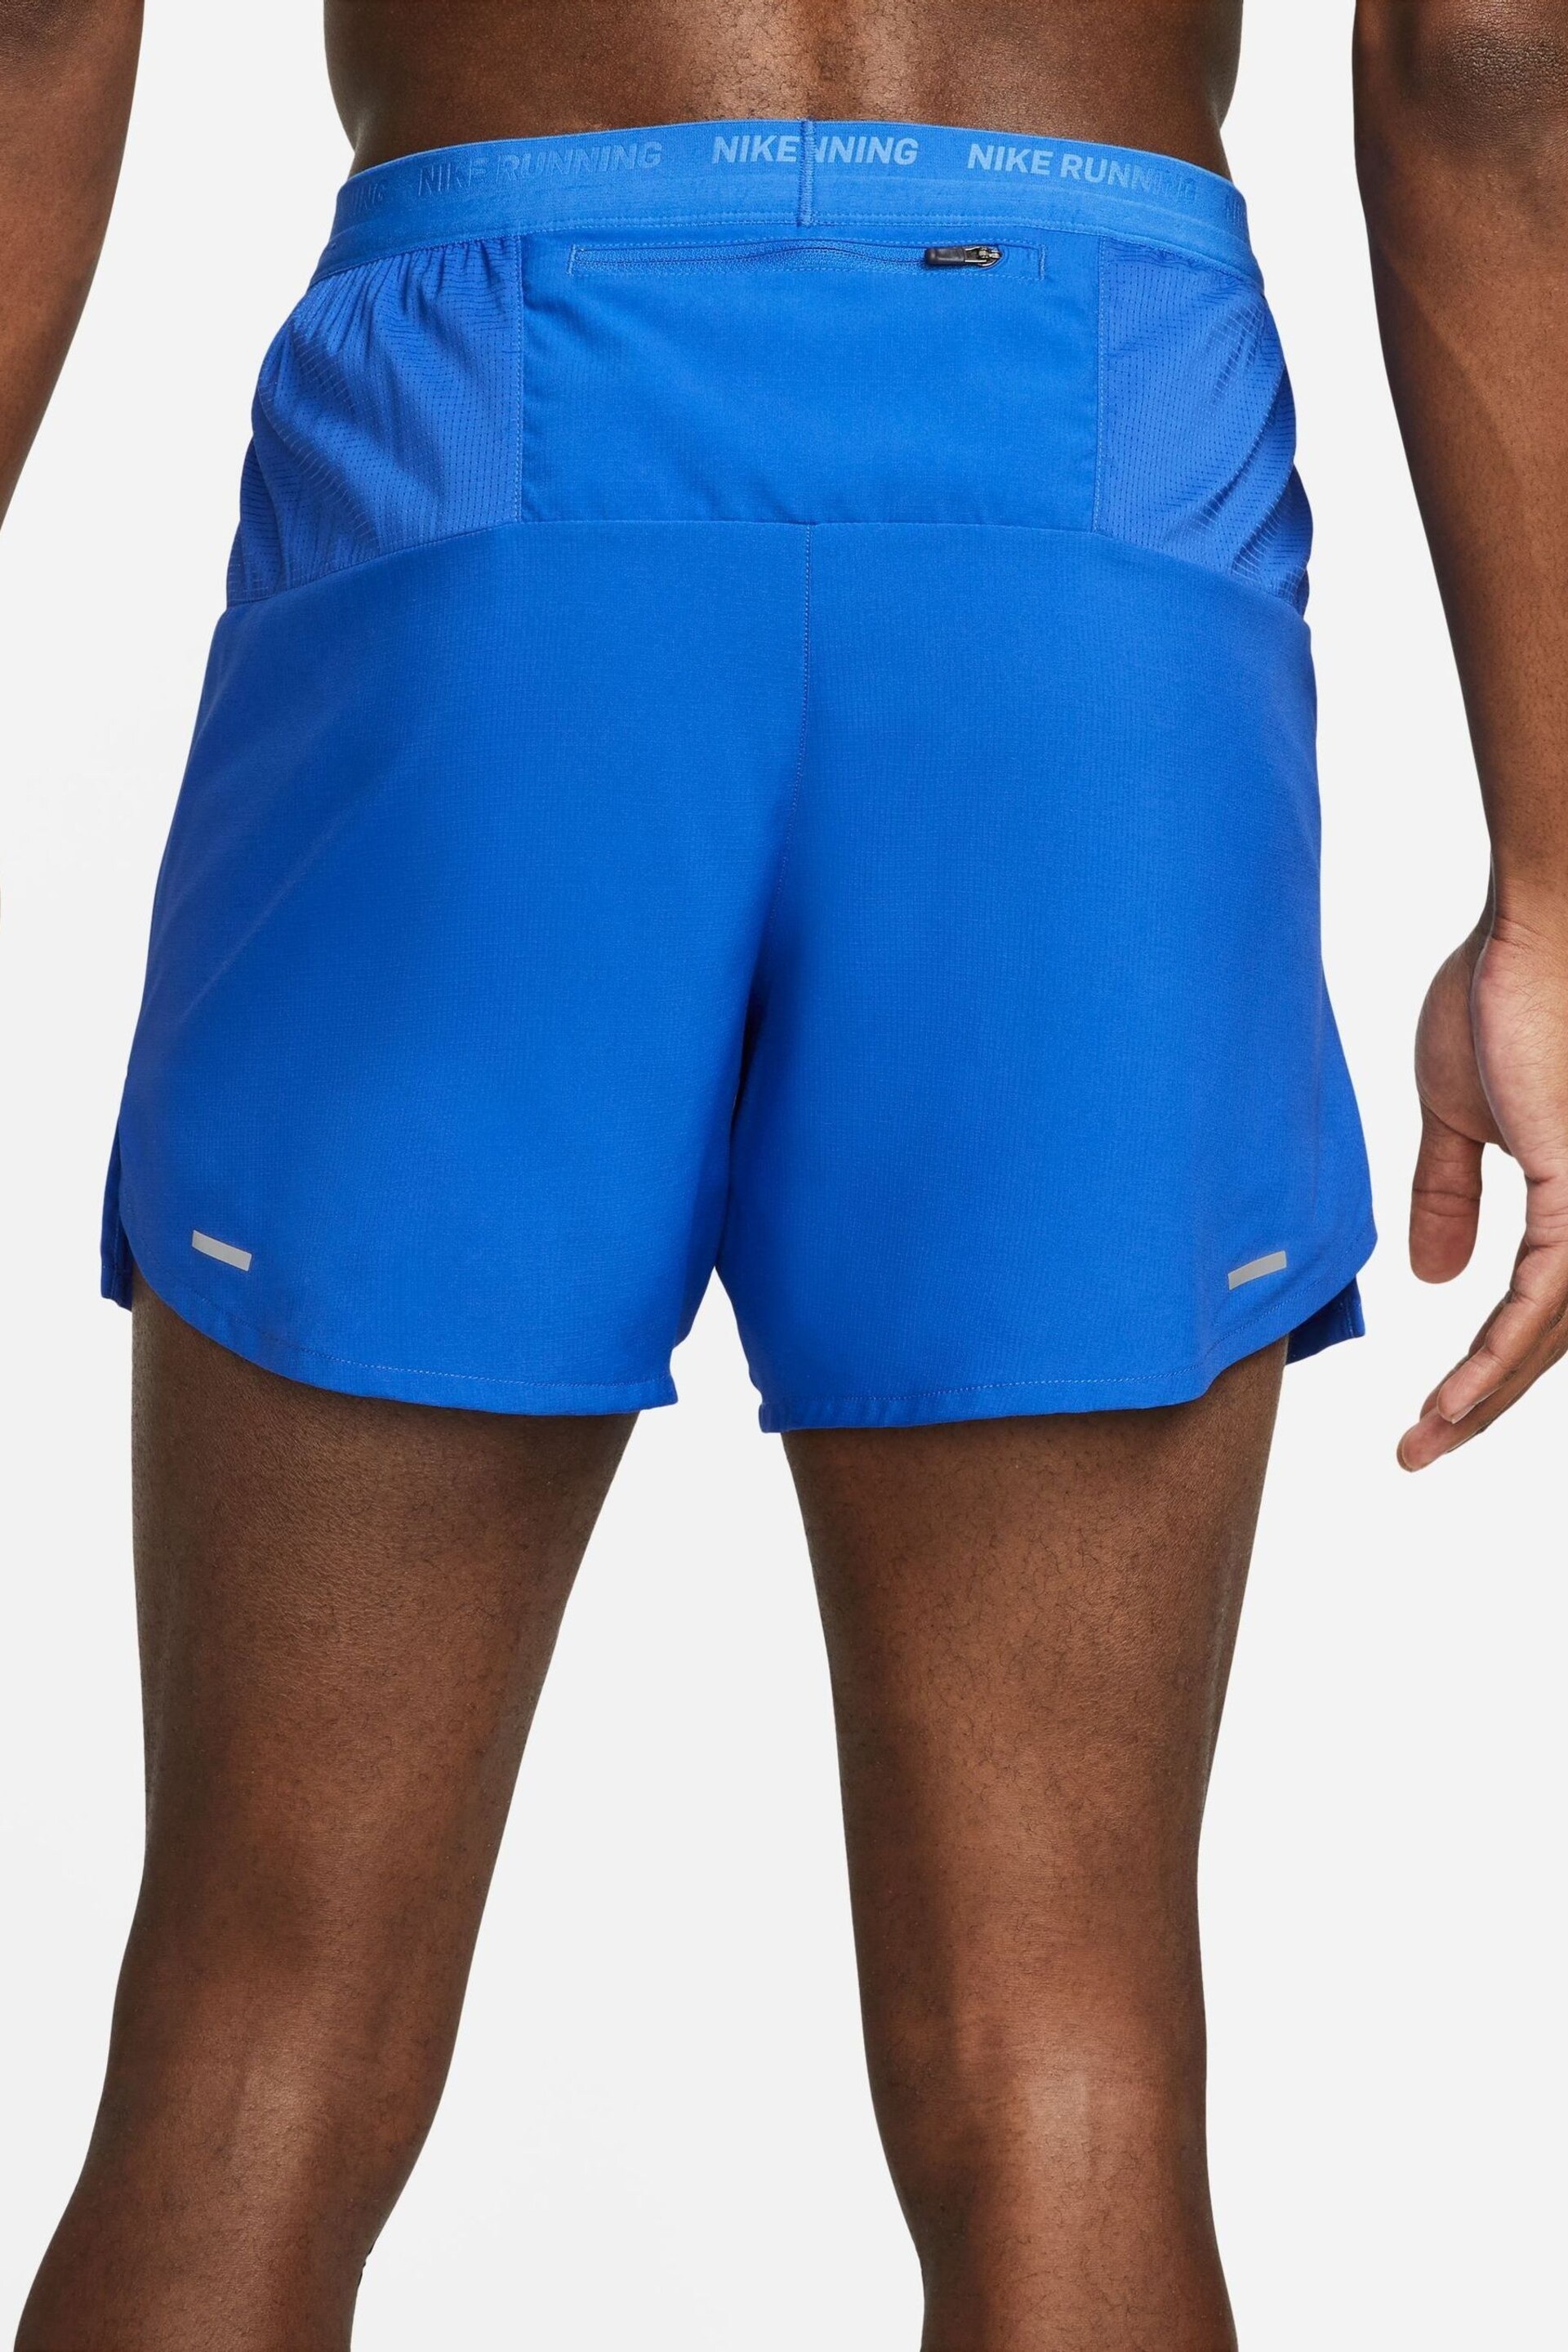 Nike Blue Dri-FIT Stride 5 Inch Running Shorts - Image 2 of 16